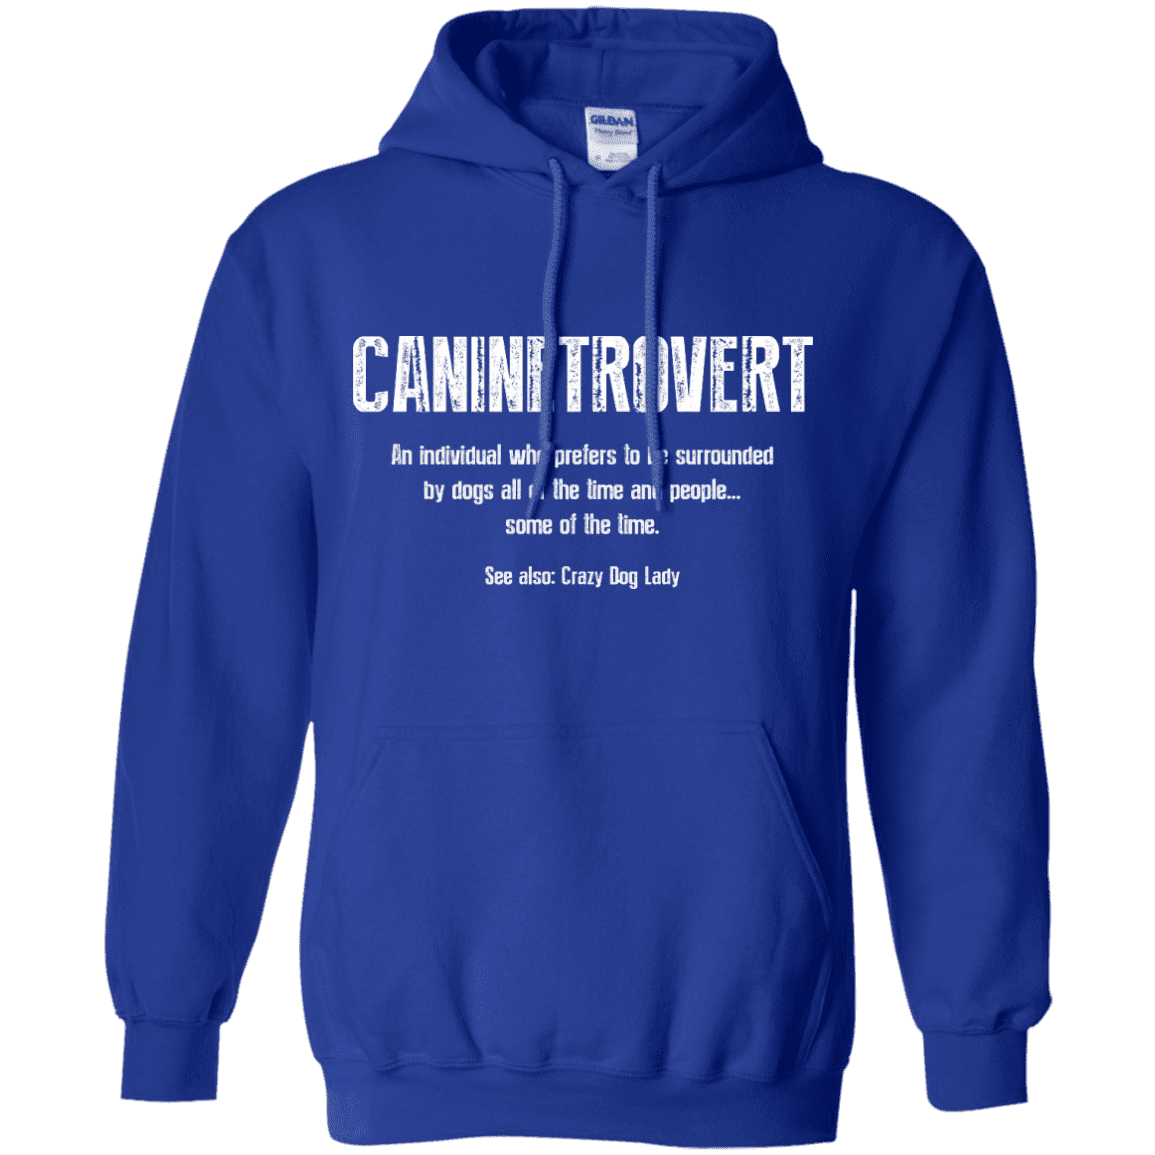 Caninetrovert - Hoodie.